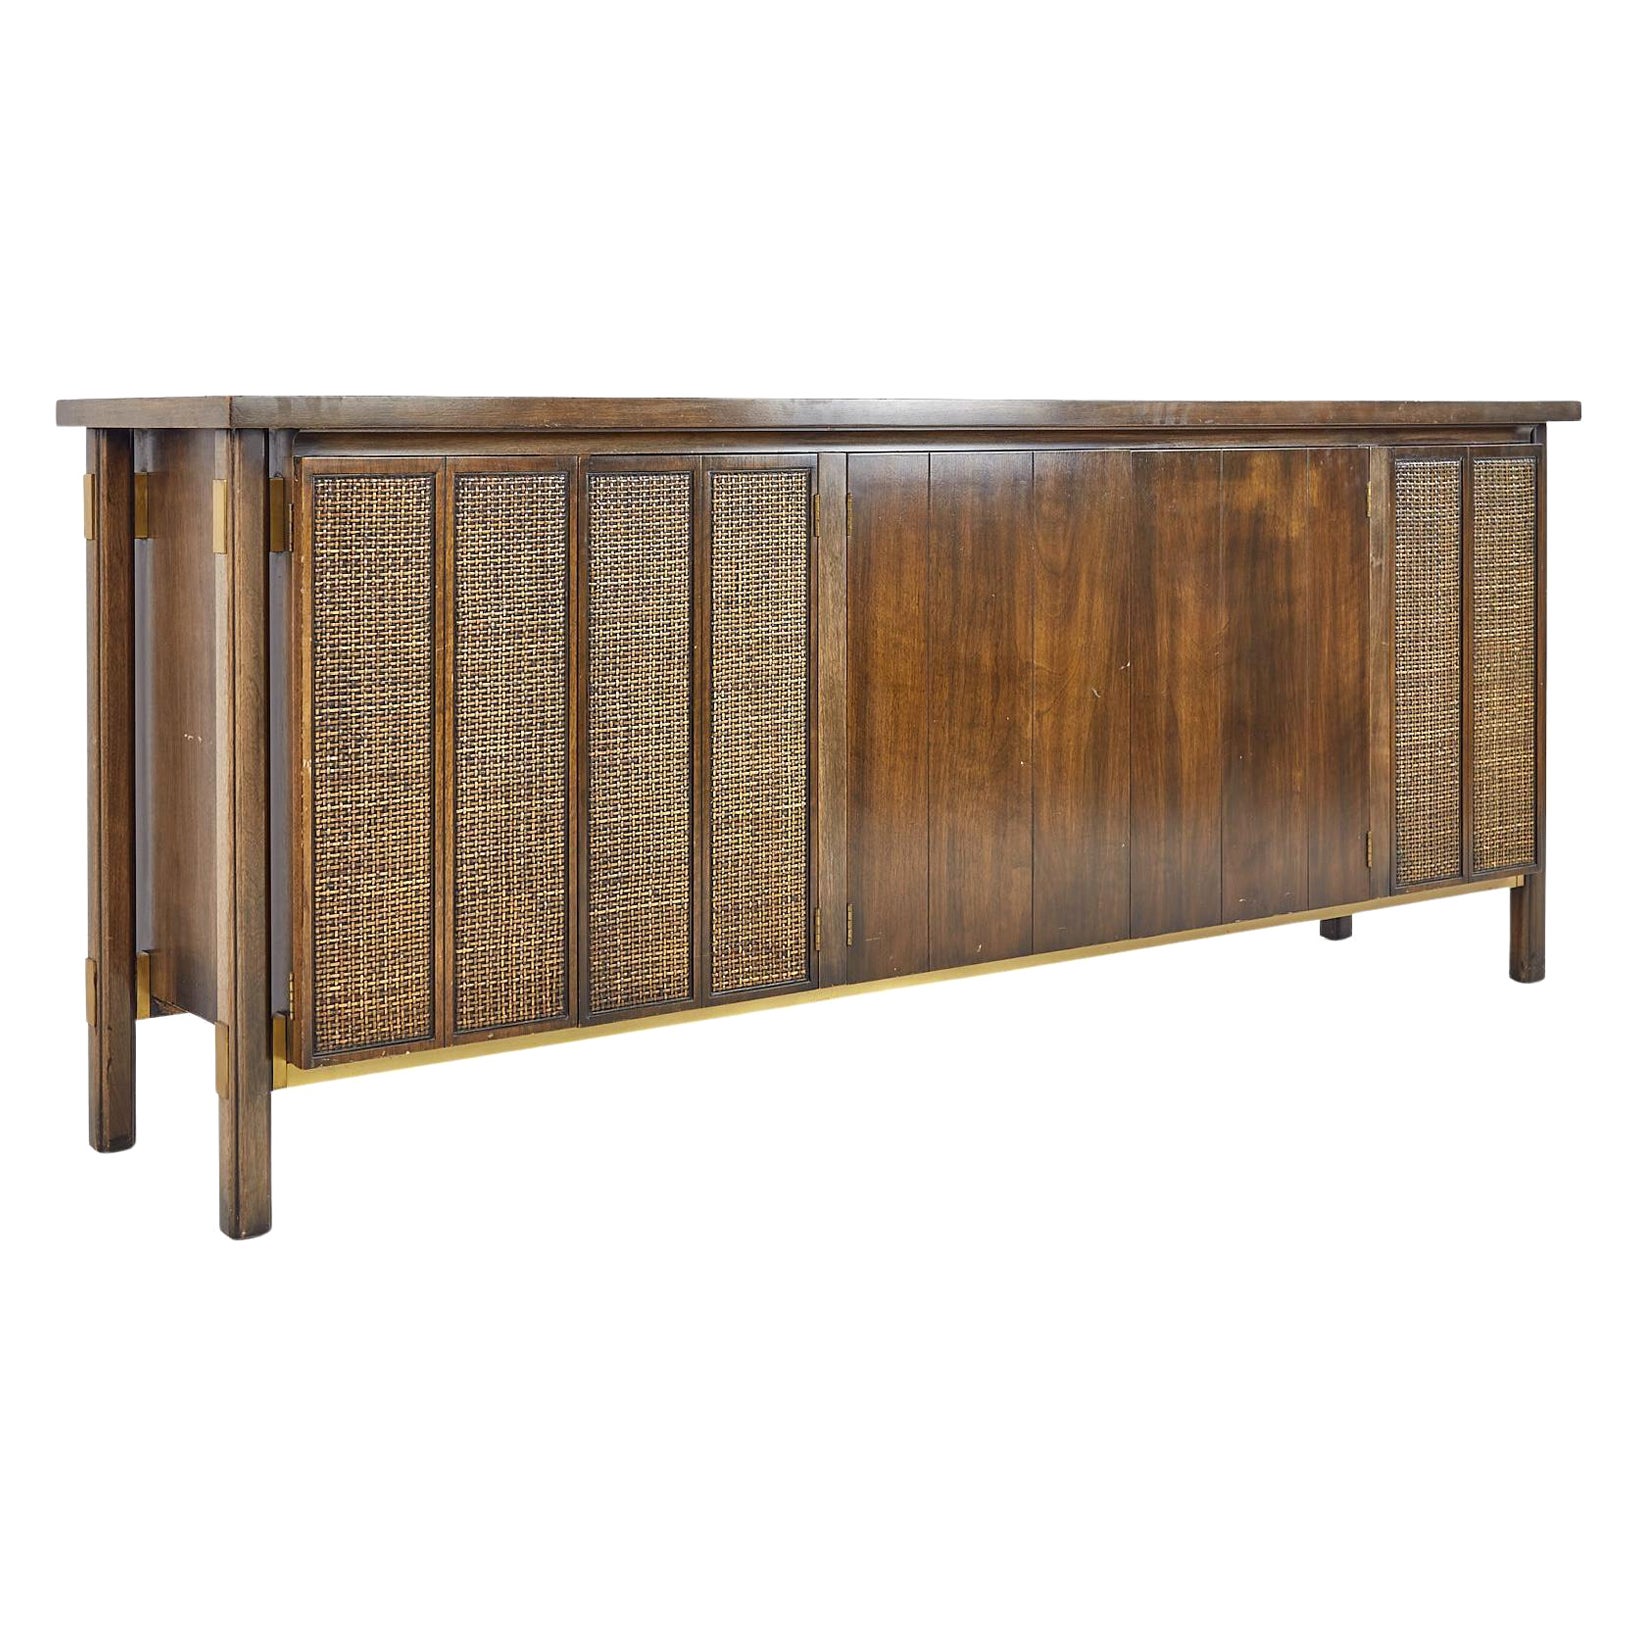 Johnson Furniture Mid-Century Cane Front Sideboard Credenza